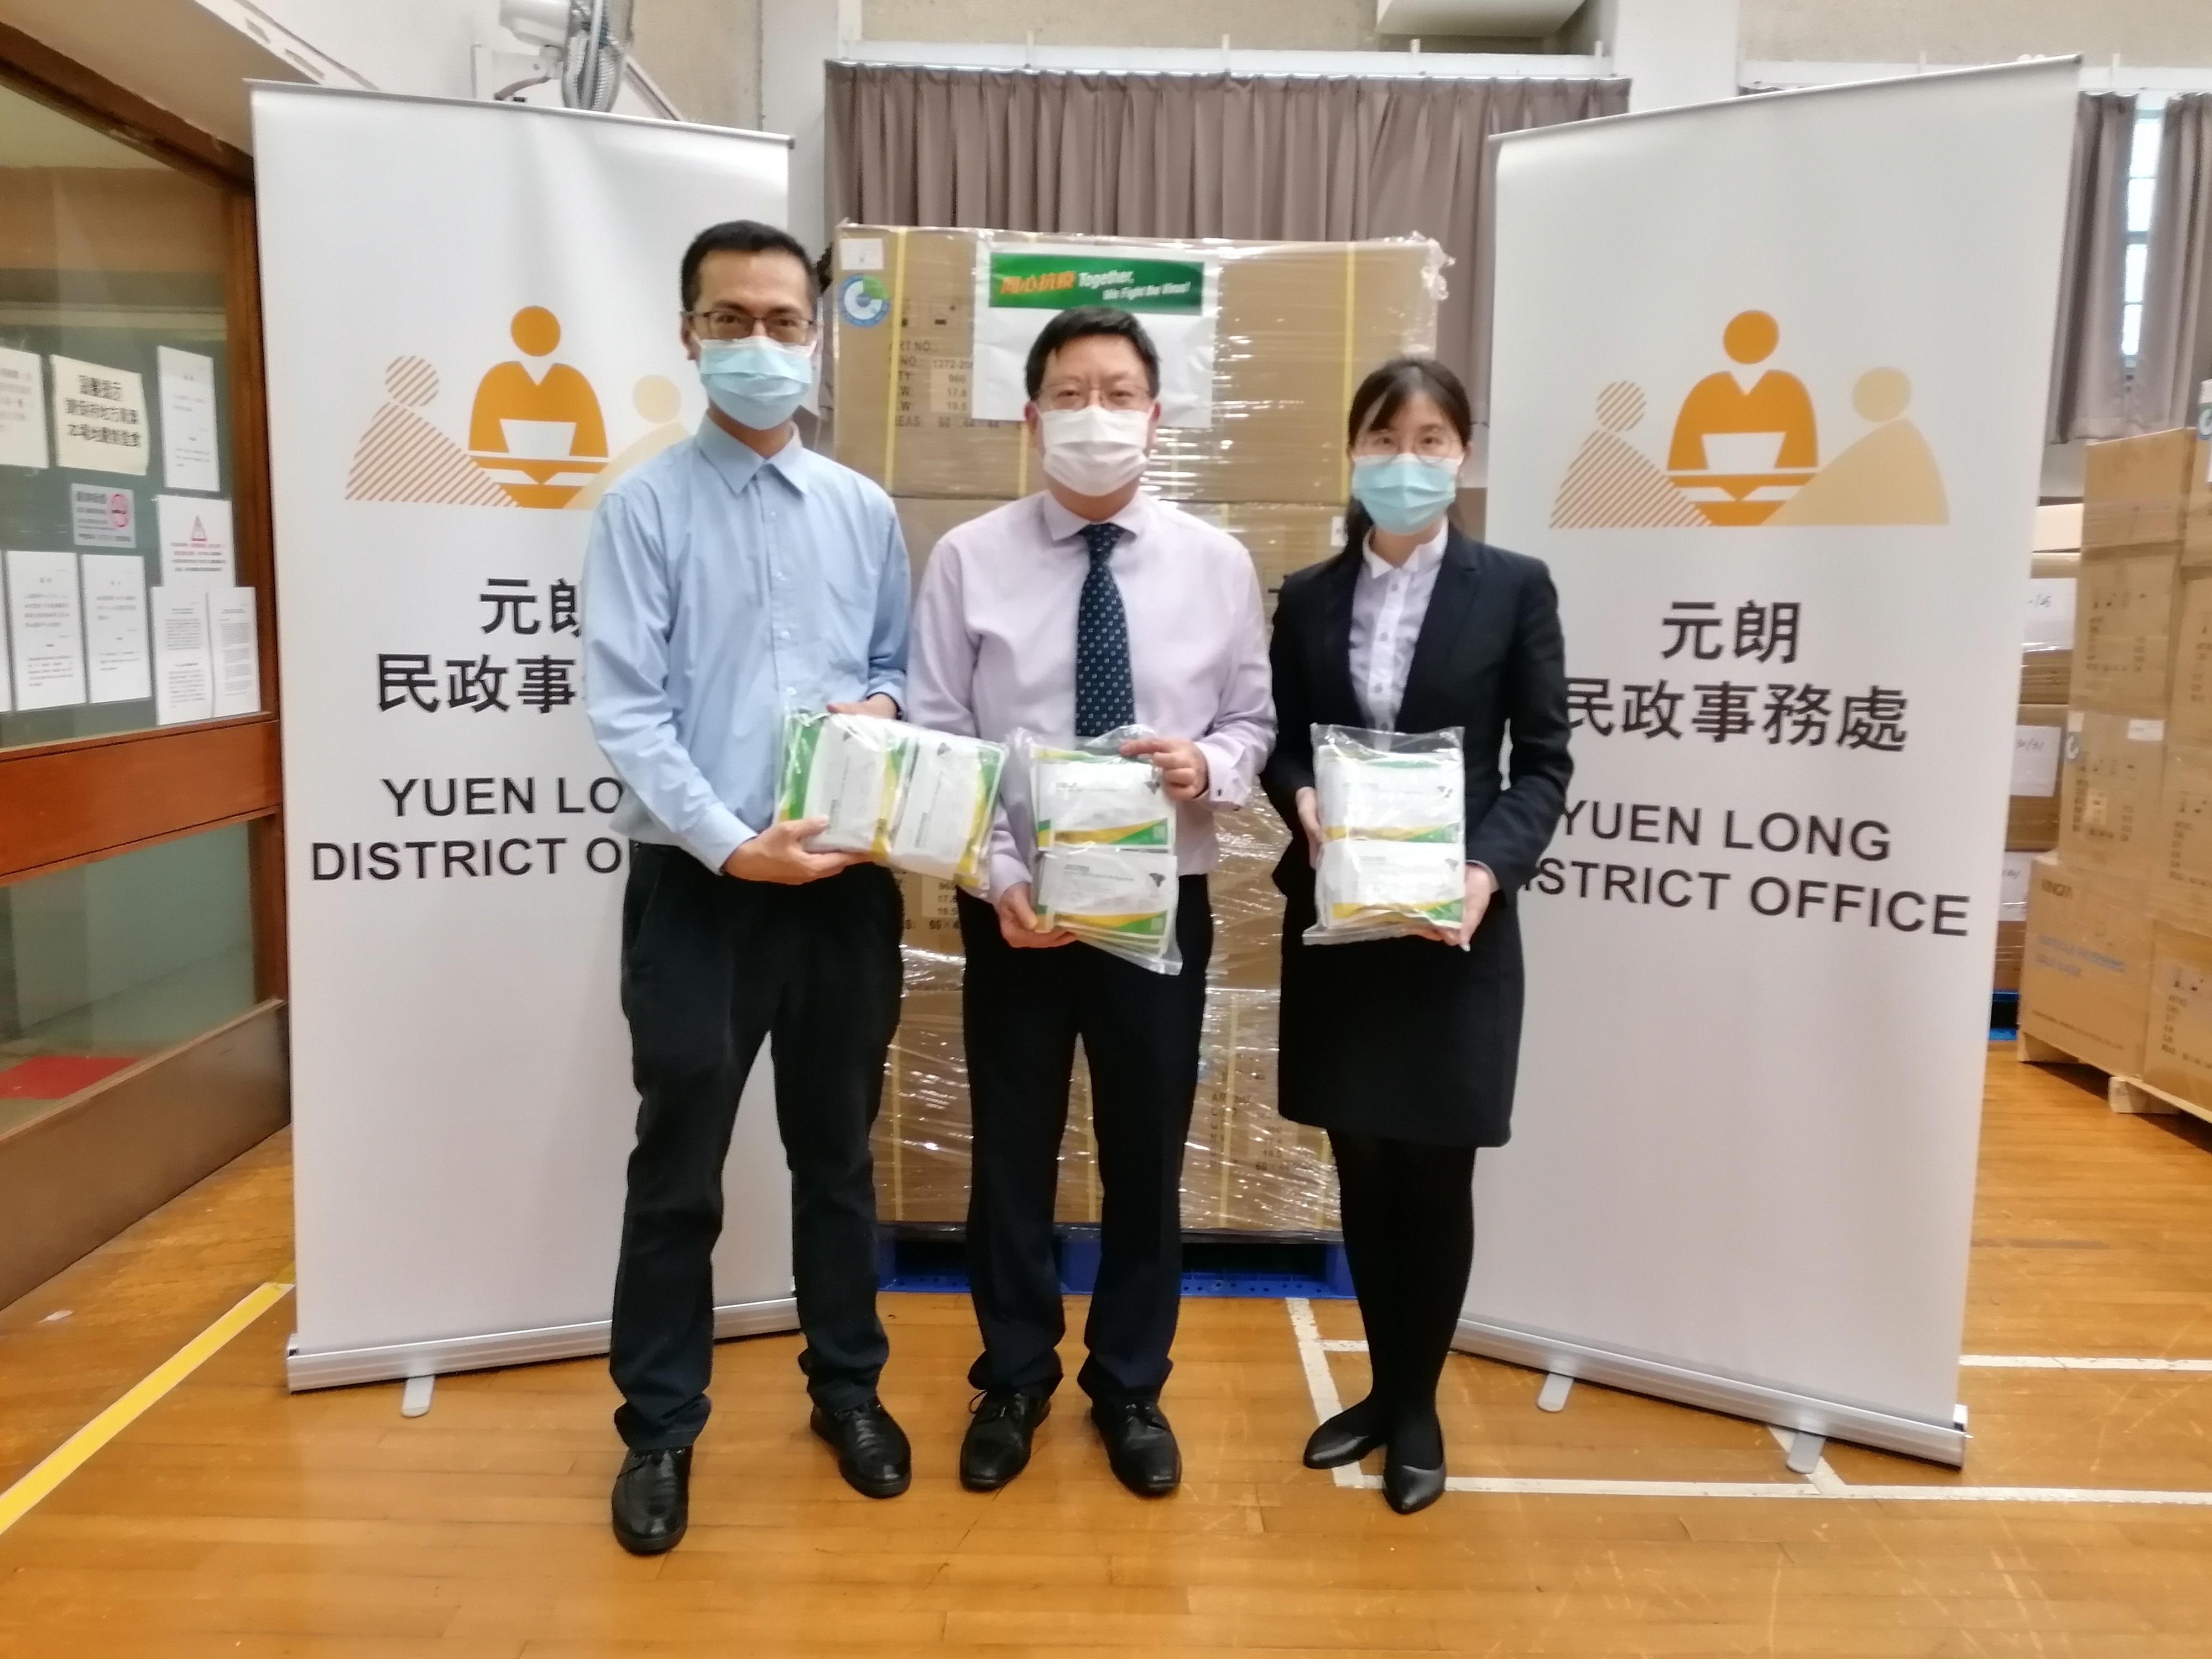 The Yuen Long District Office today (May 13) distributed COVID-19 rapid test kits to households, cleansing workers and property management staff living and working in Tin Shing Court for voluntary testing through the property management company.